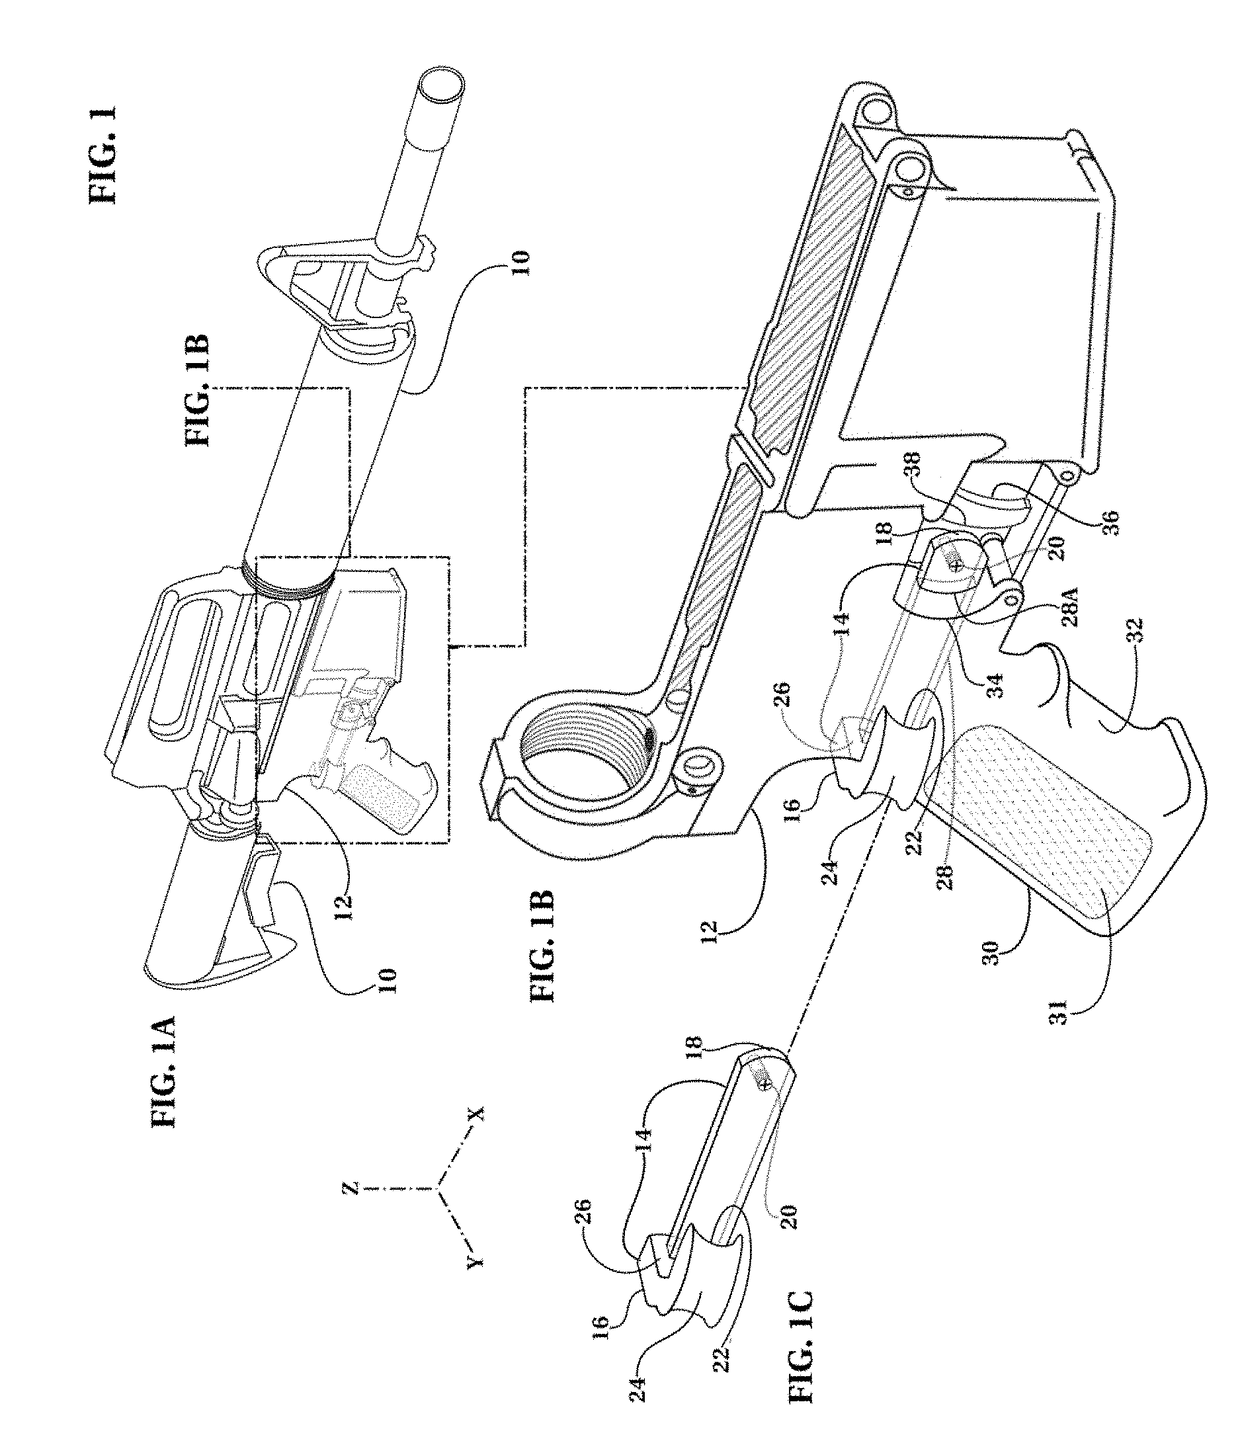 Method and mechanism for interactively governing trigger movement and regulating the cyclic firing rate of firearms